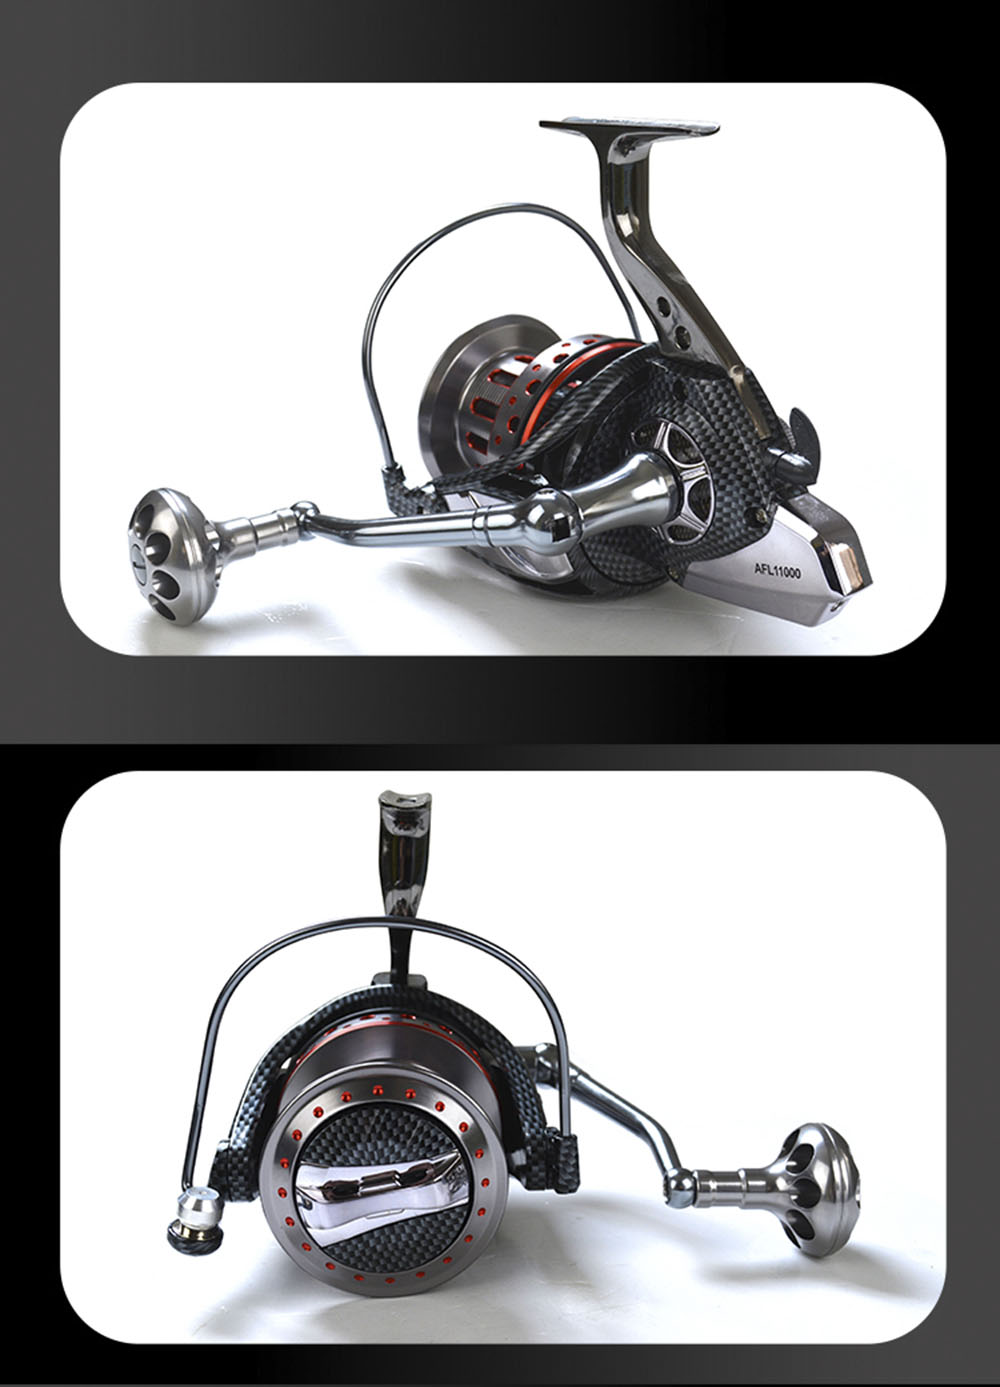 Big 4.7:1 Full Metal Fishing Spinning Reel with Foldable Handle